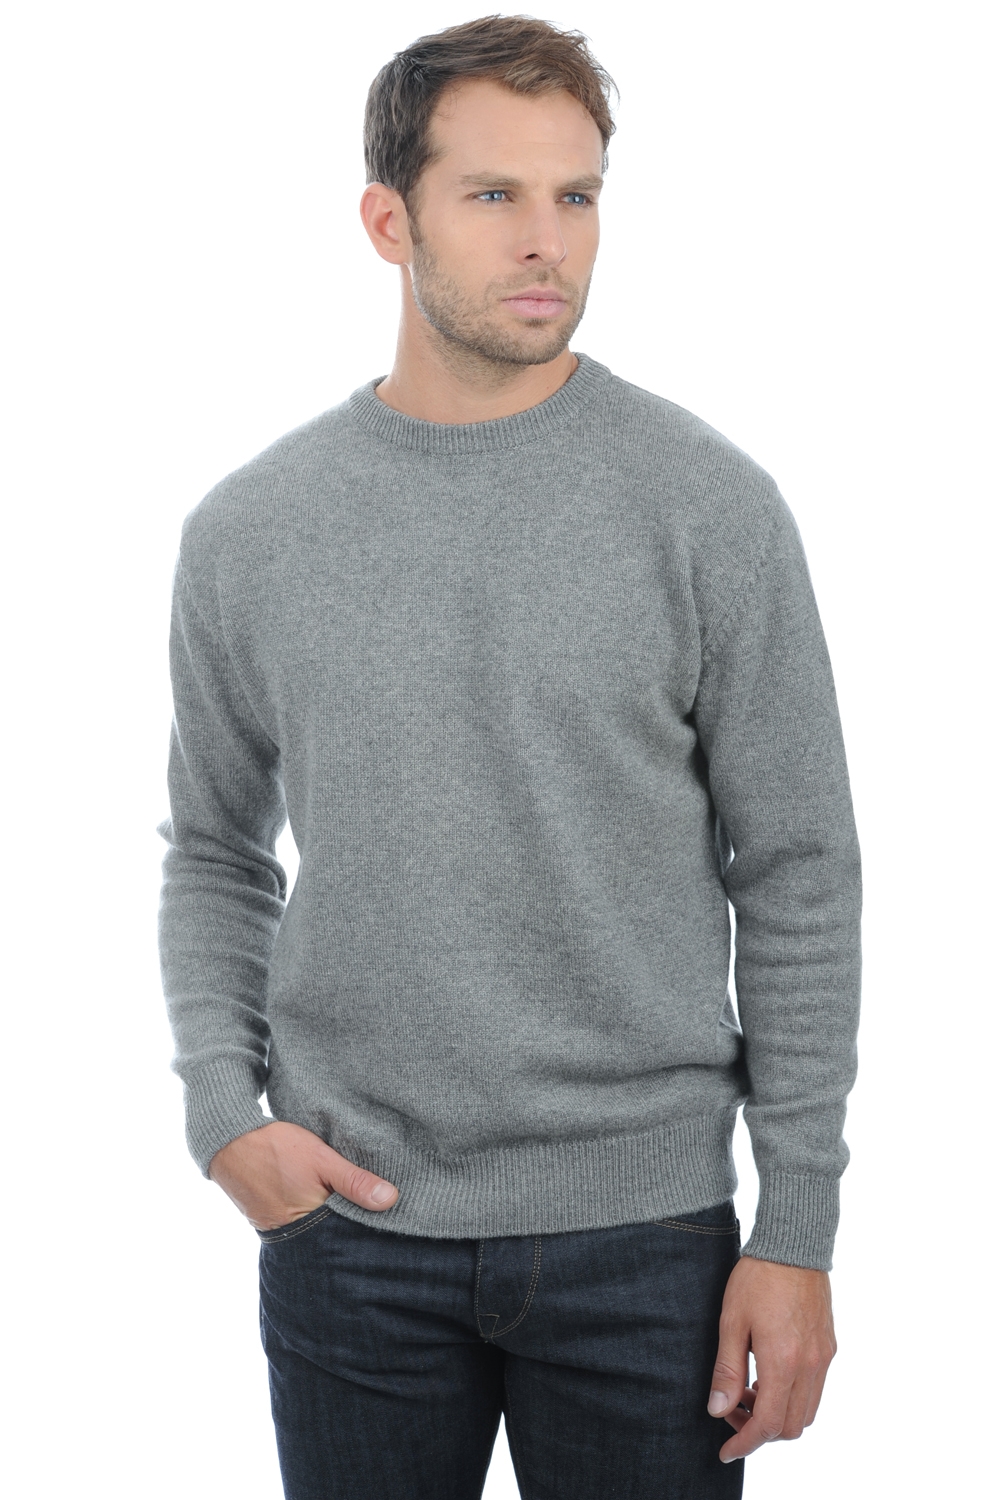 Cachemire pull homme nestor 4f gris chine s